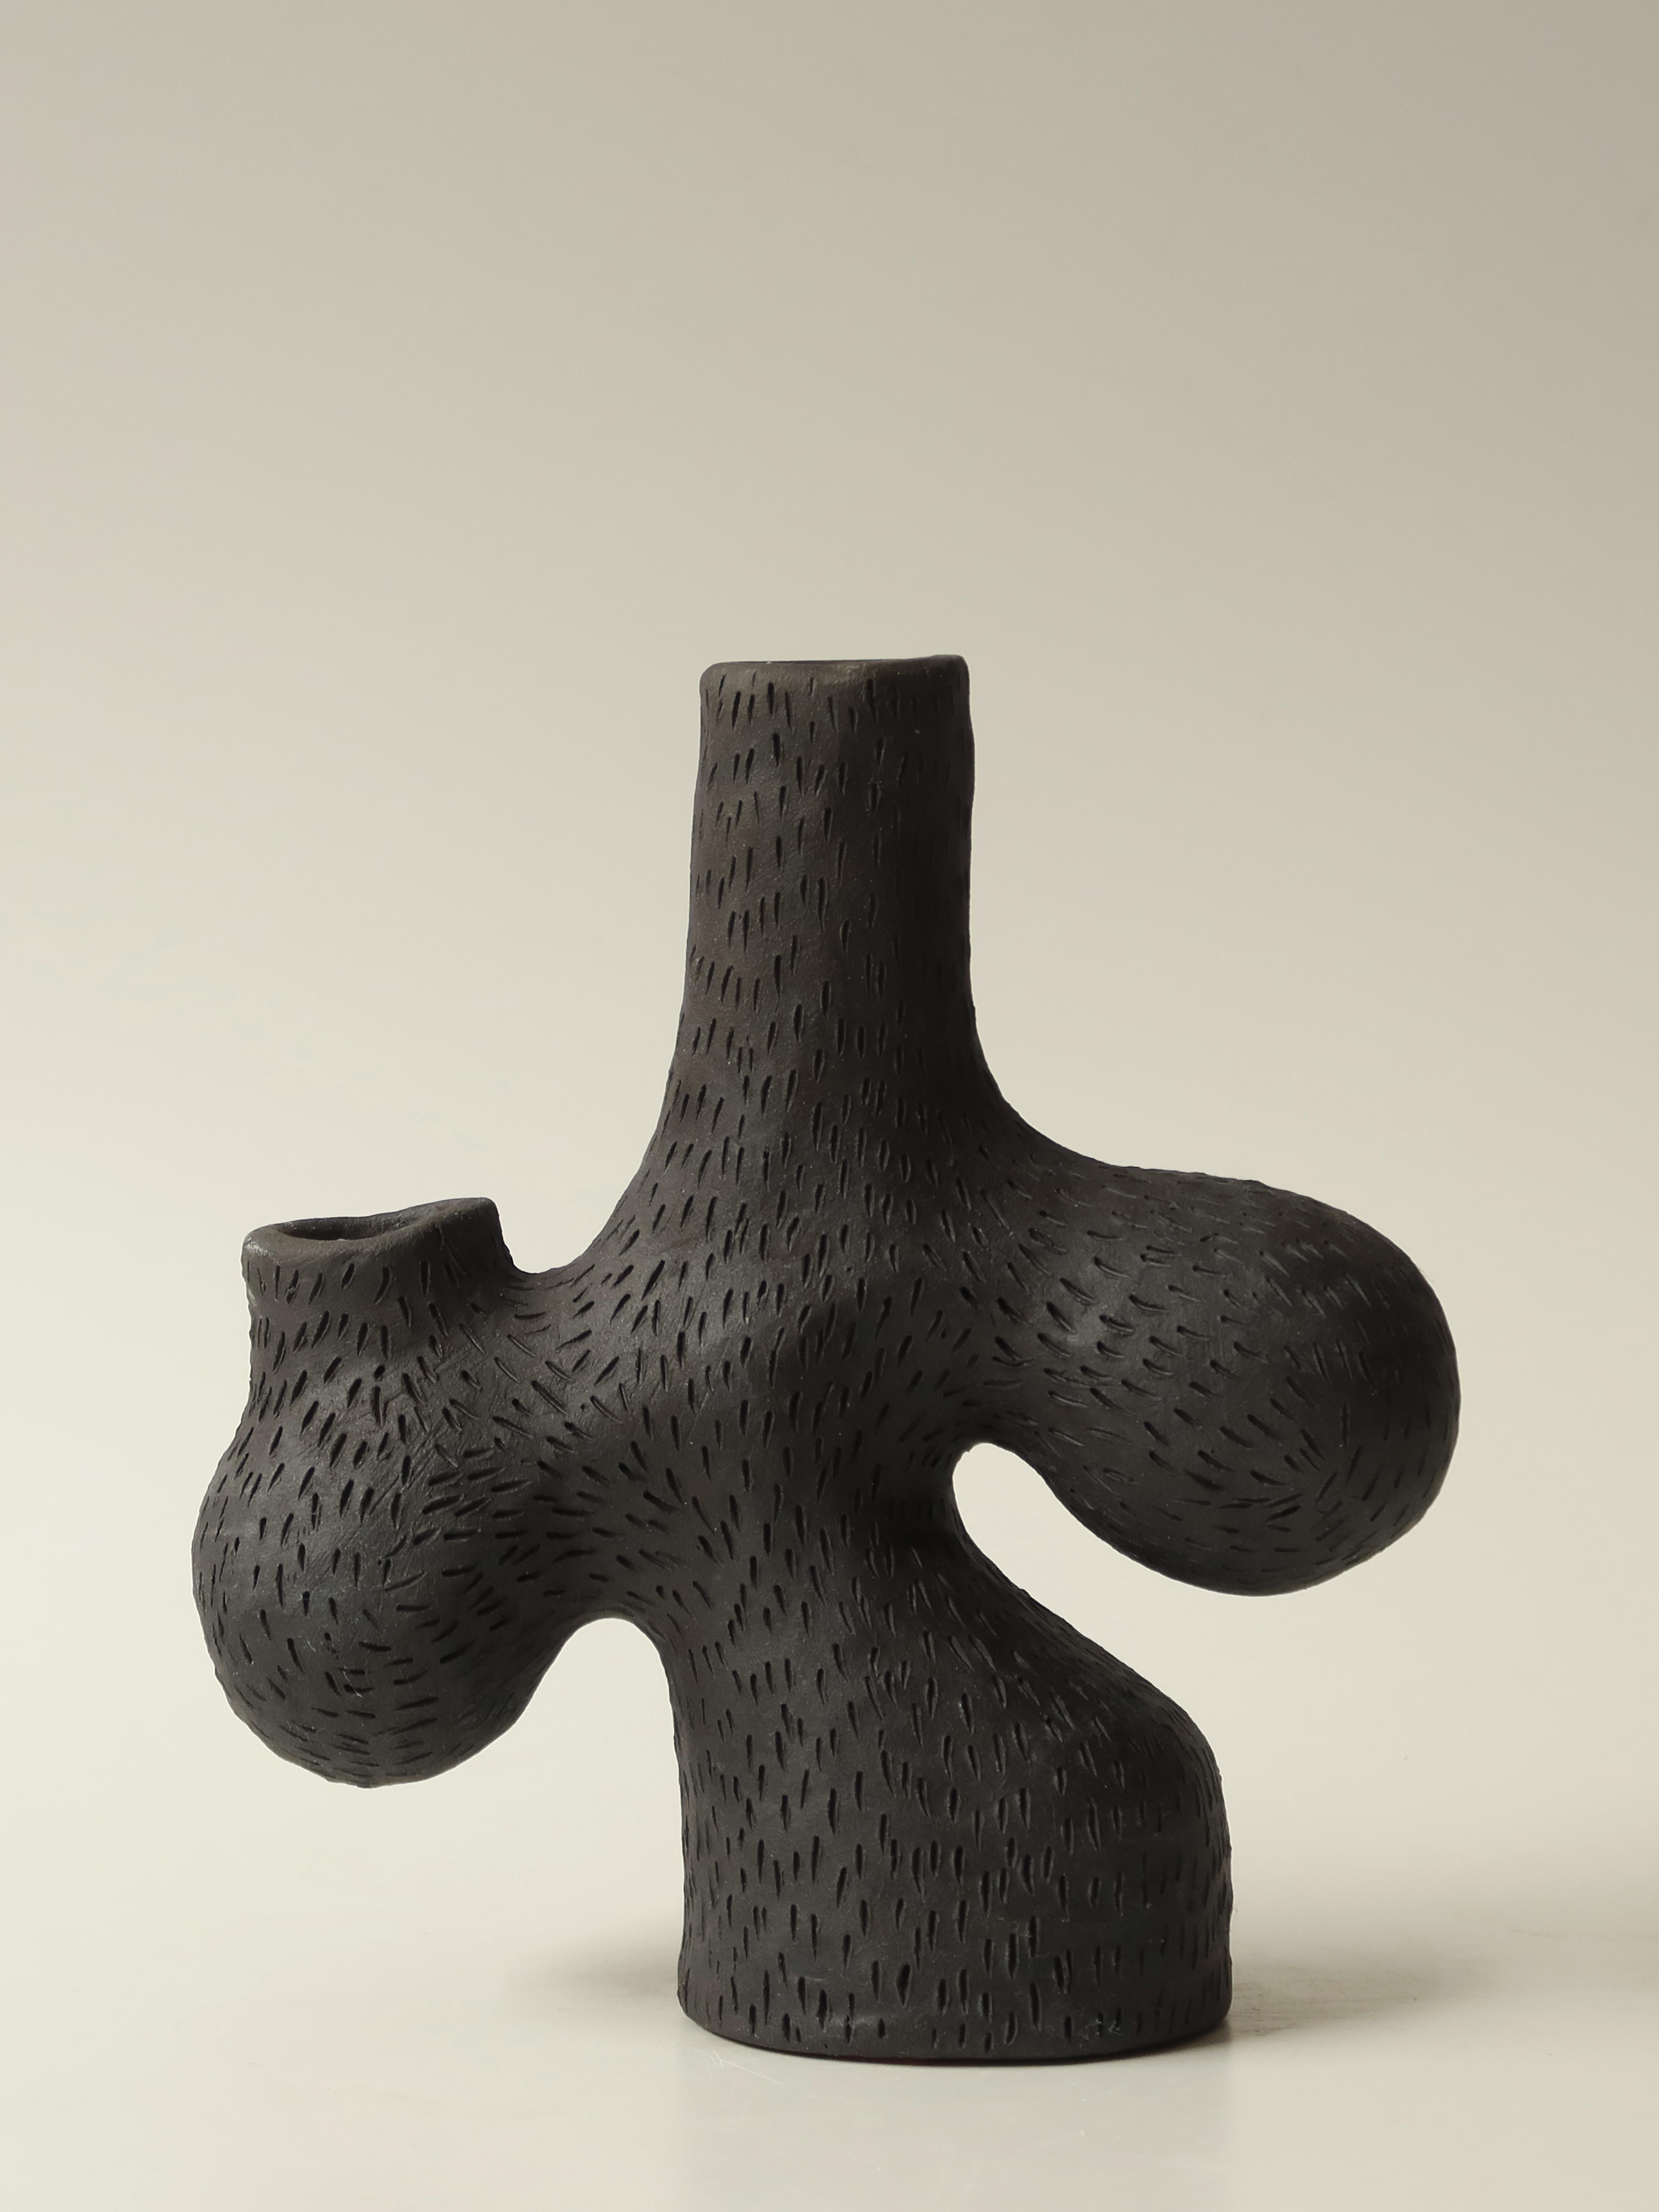 Forest candelabra no.1 by Jan Ernst
Dimensions: W 20 x D 80 x H 20 cm
Materials: White stoneware, Black clay, Terracotta

Glazed to client specification.


Jan Ernst’s work takes on an experimental approach, as he prefers making bespoke